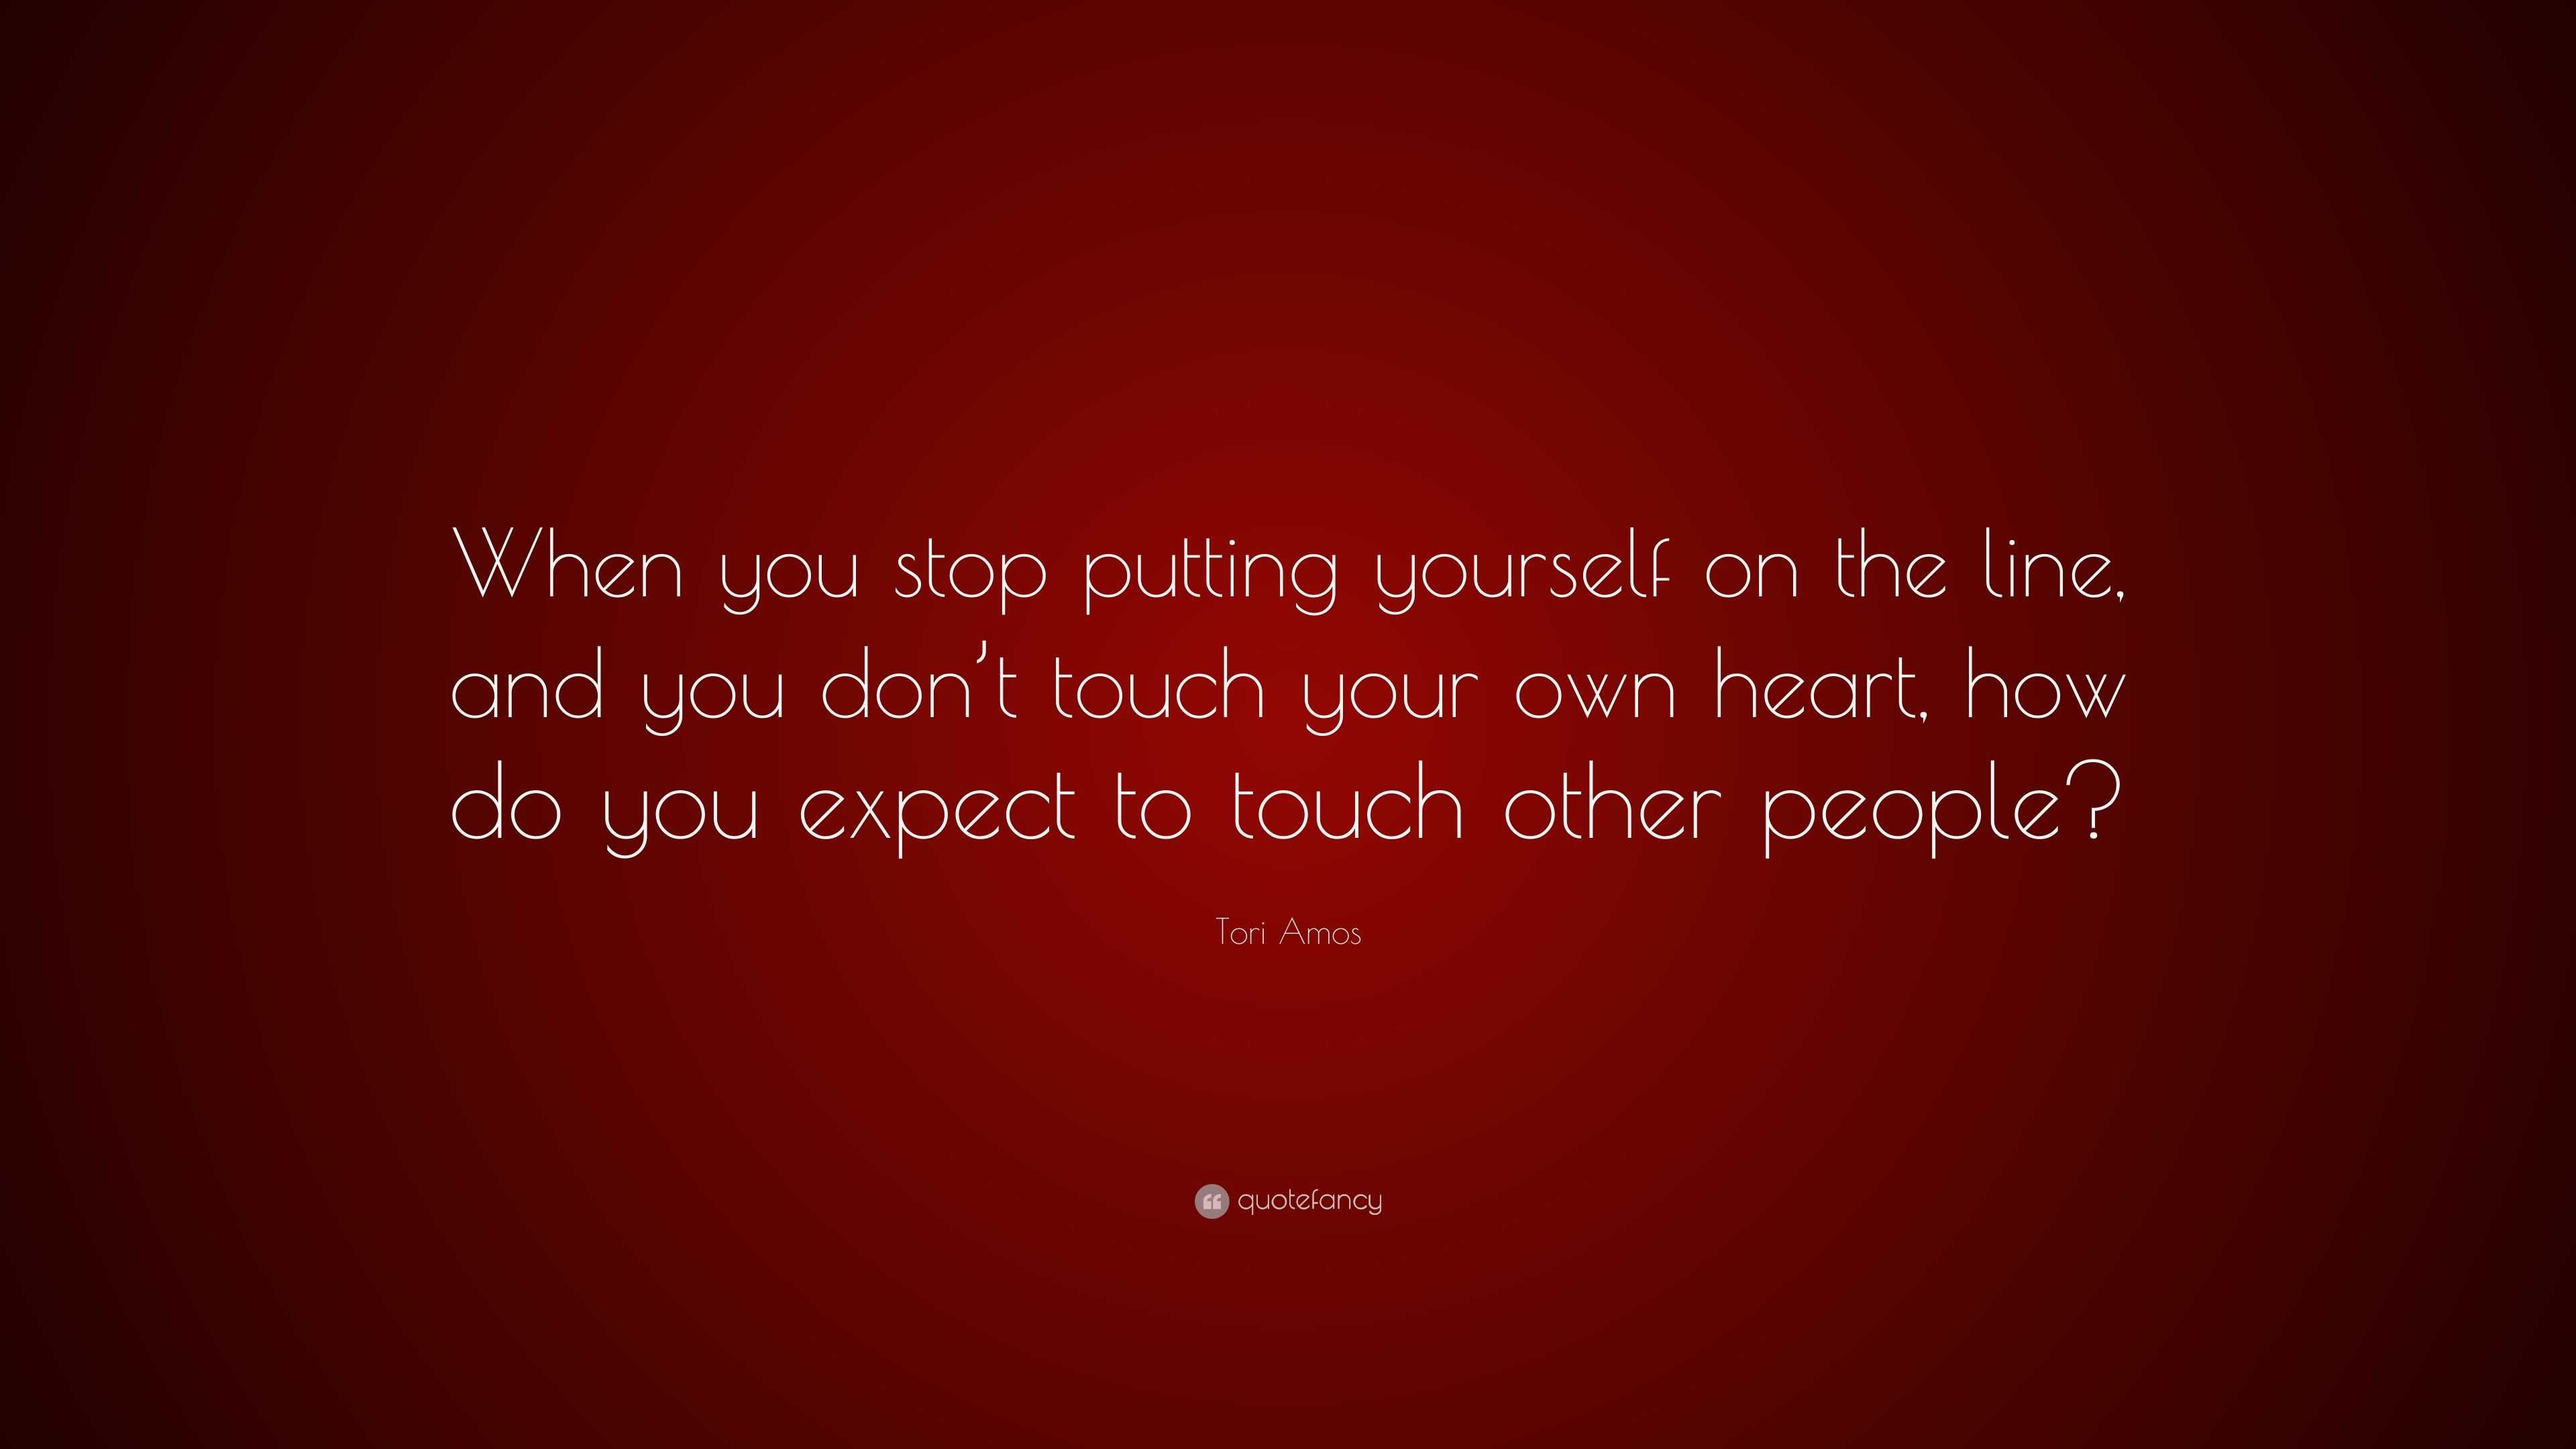 Tori Amos Quote: “When you stop putting yourself on the line, and you don't  touch